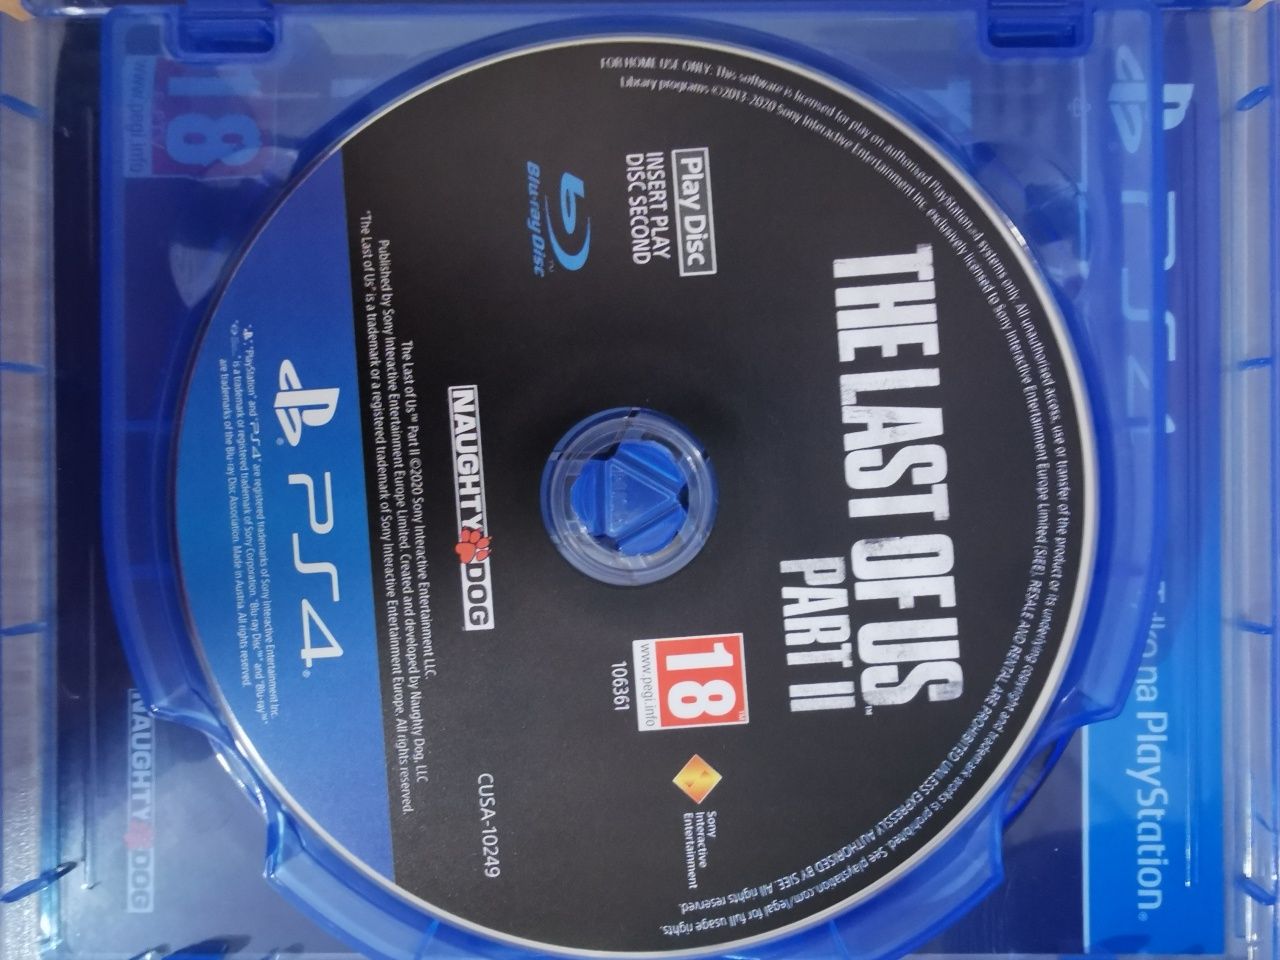 The Last of Us part II Ps4/Ps5